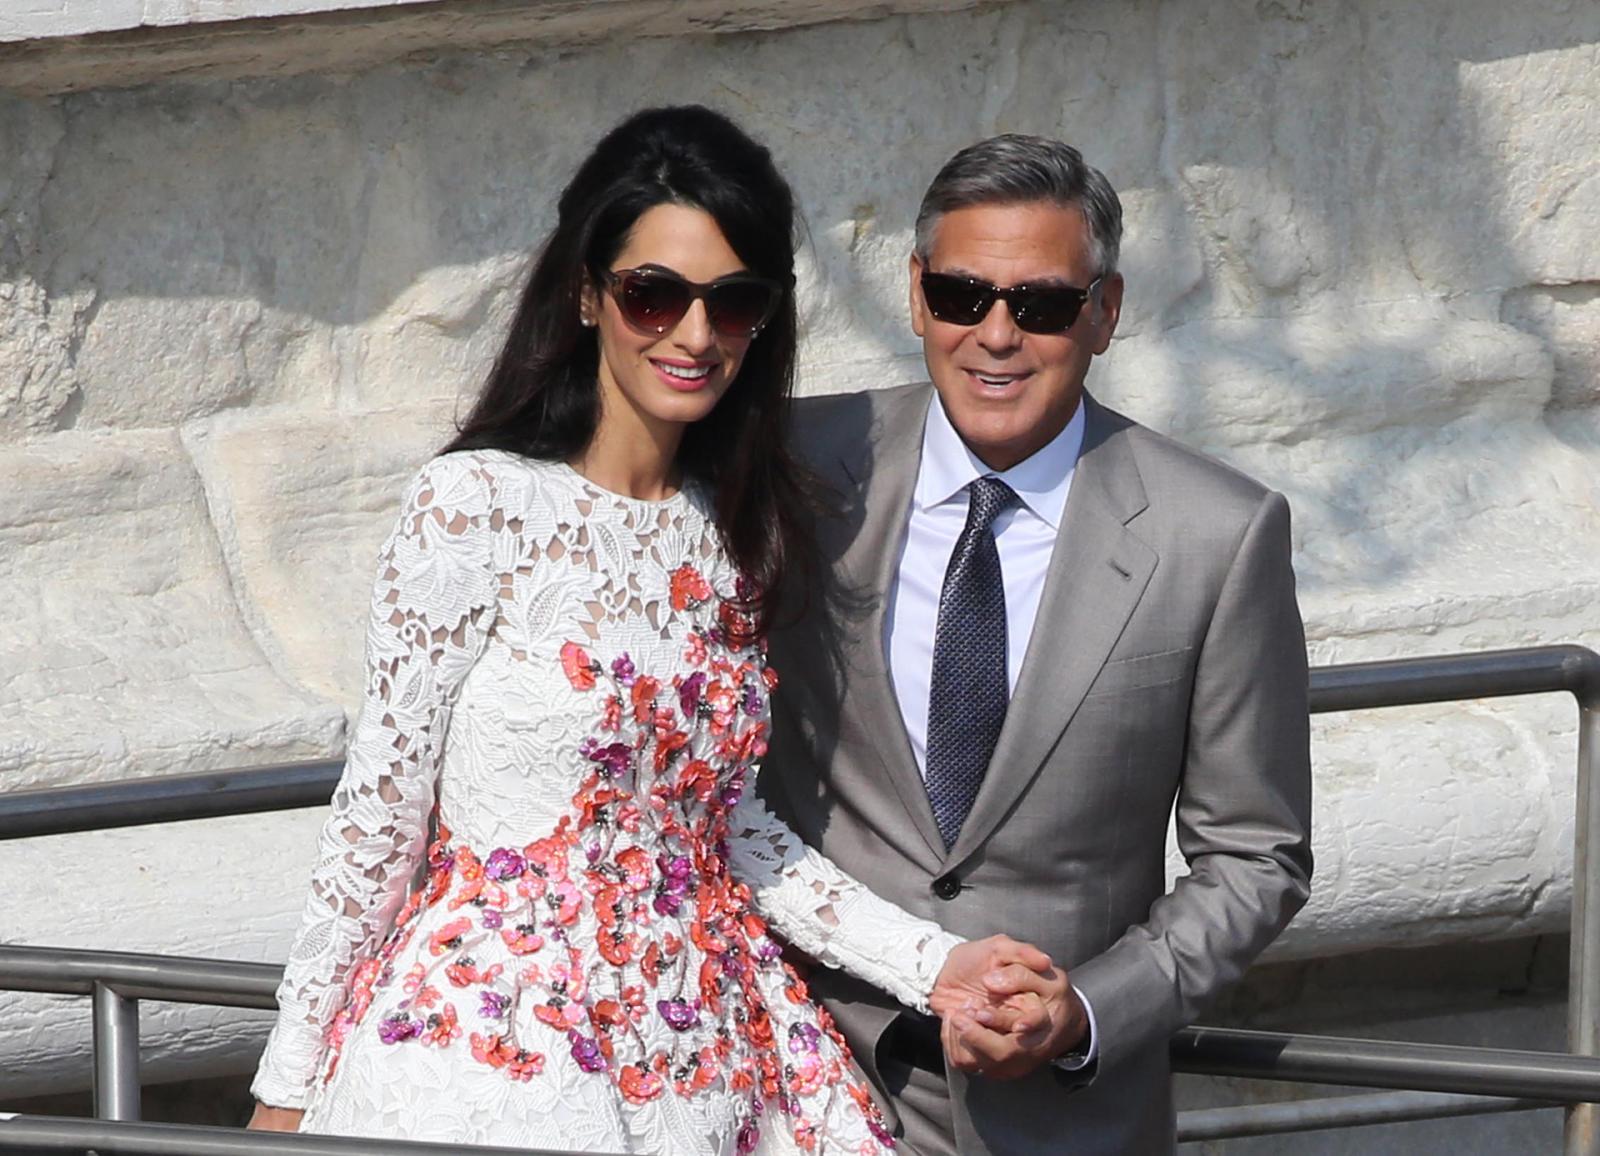 Love at First Sight: The Story of How Amal Alamuddin Won George Clooney's Heart - image 3